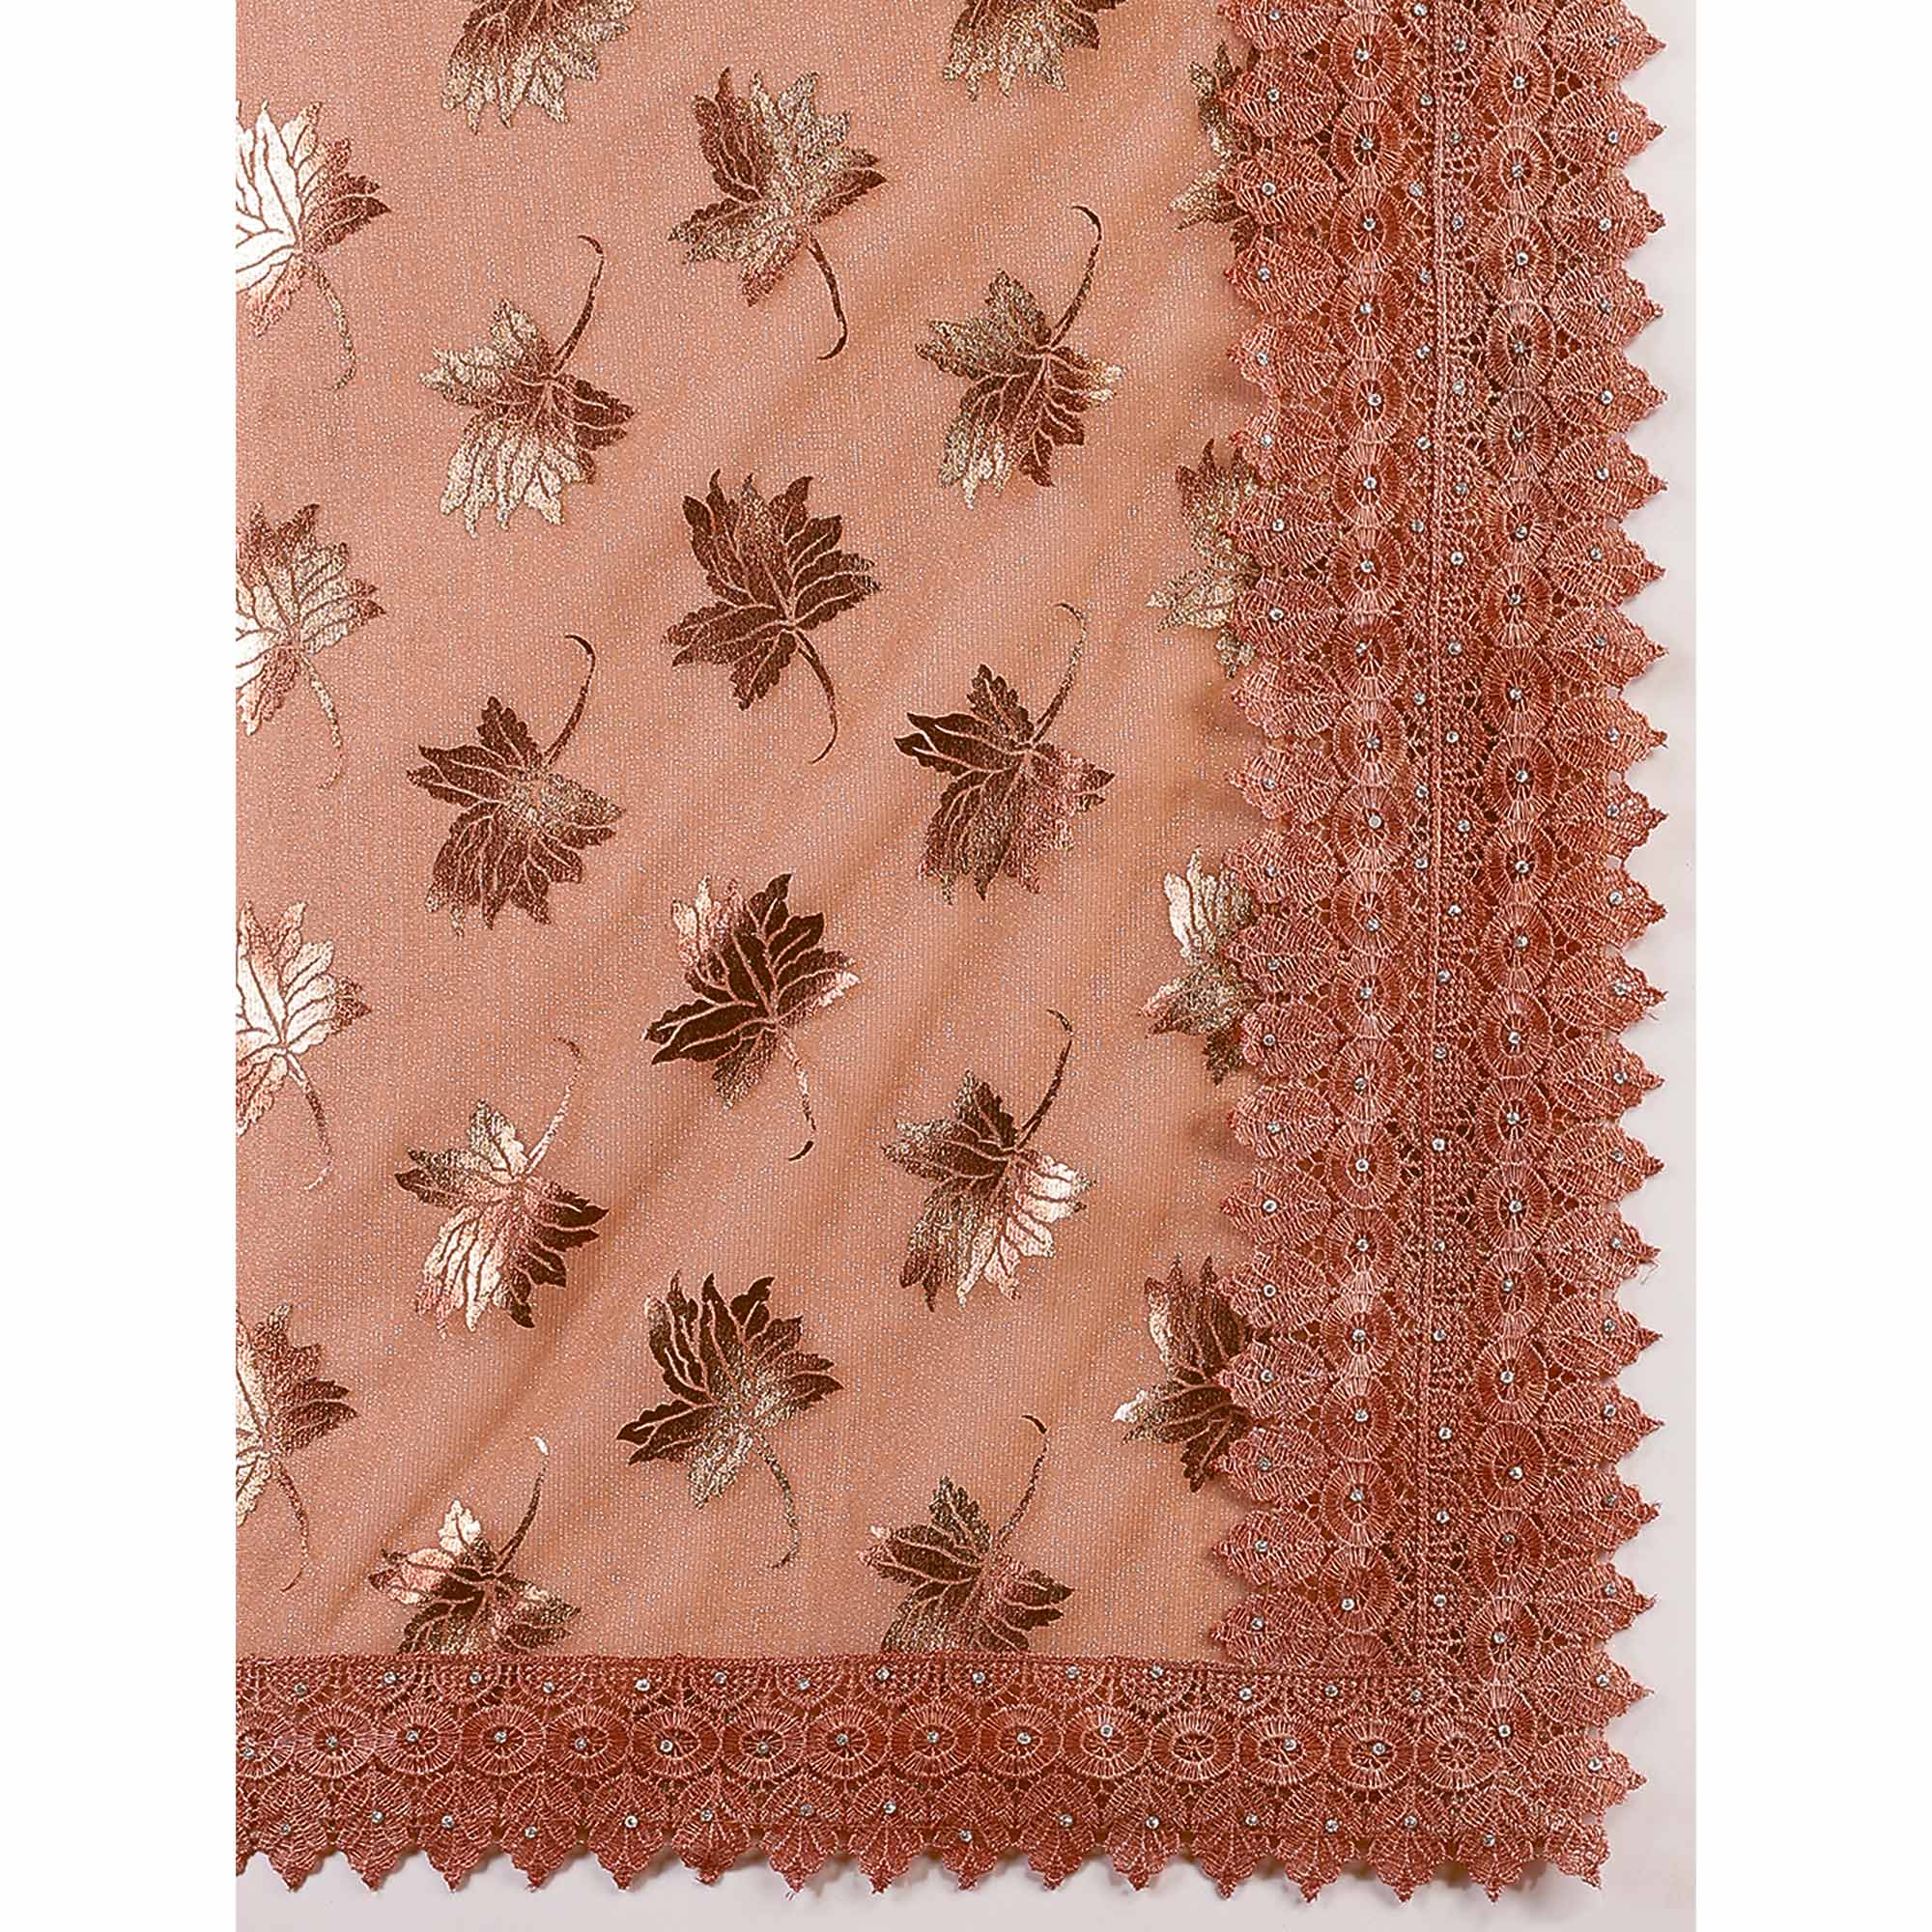 Dusty Peach Foil Printed Lycra Saree With Embroidered Lace Border